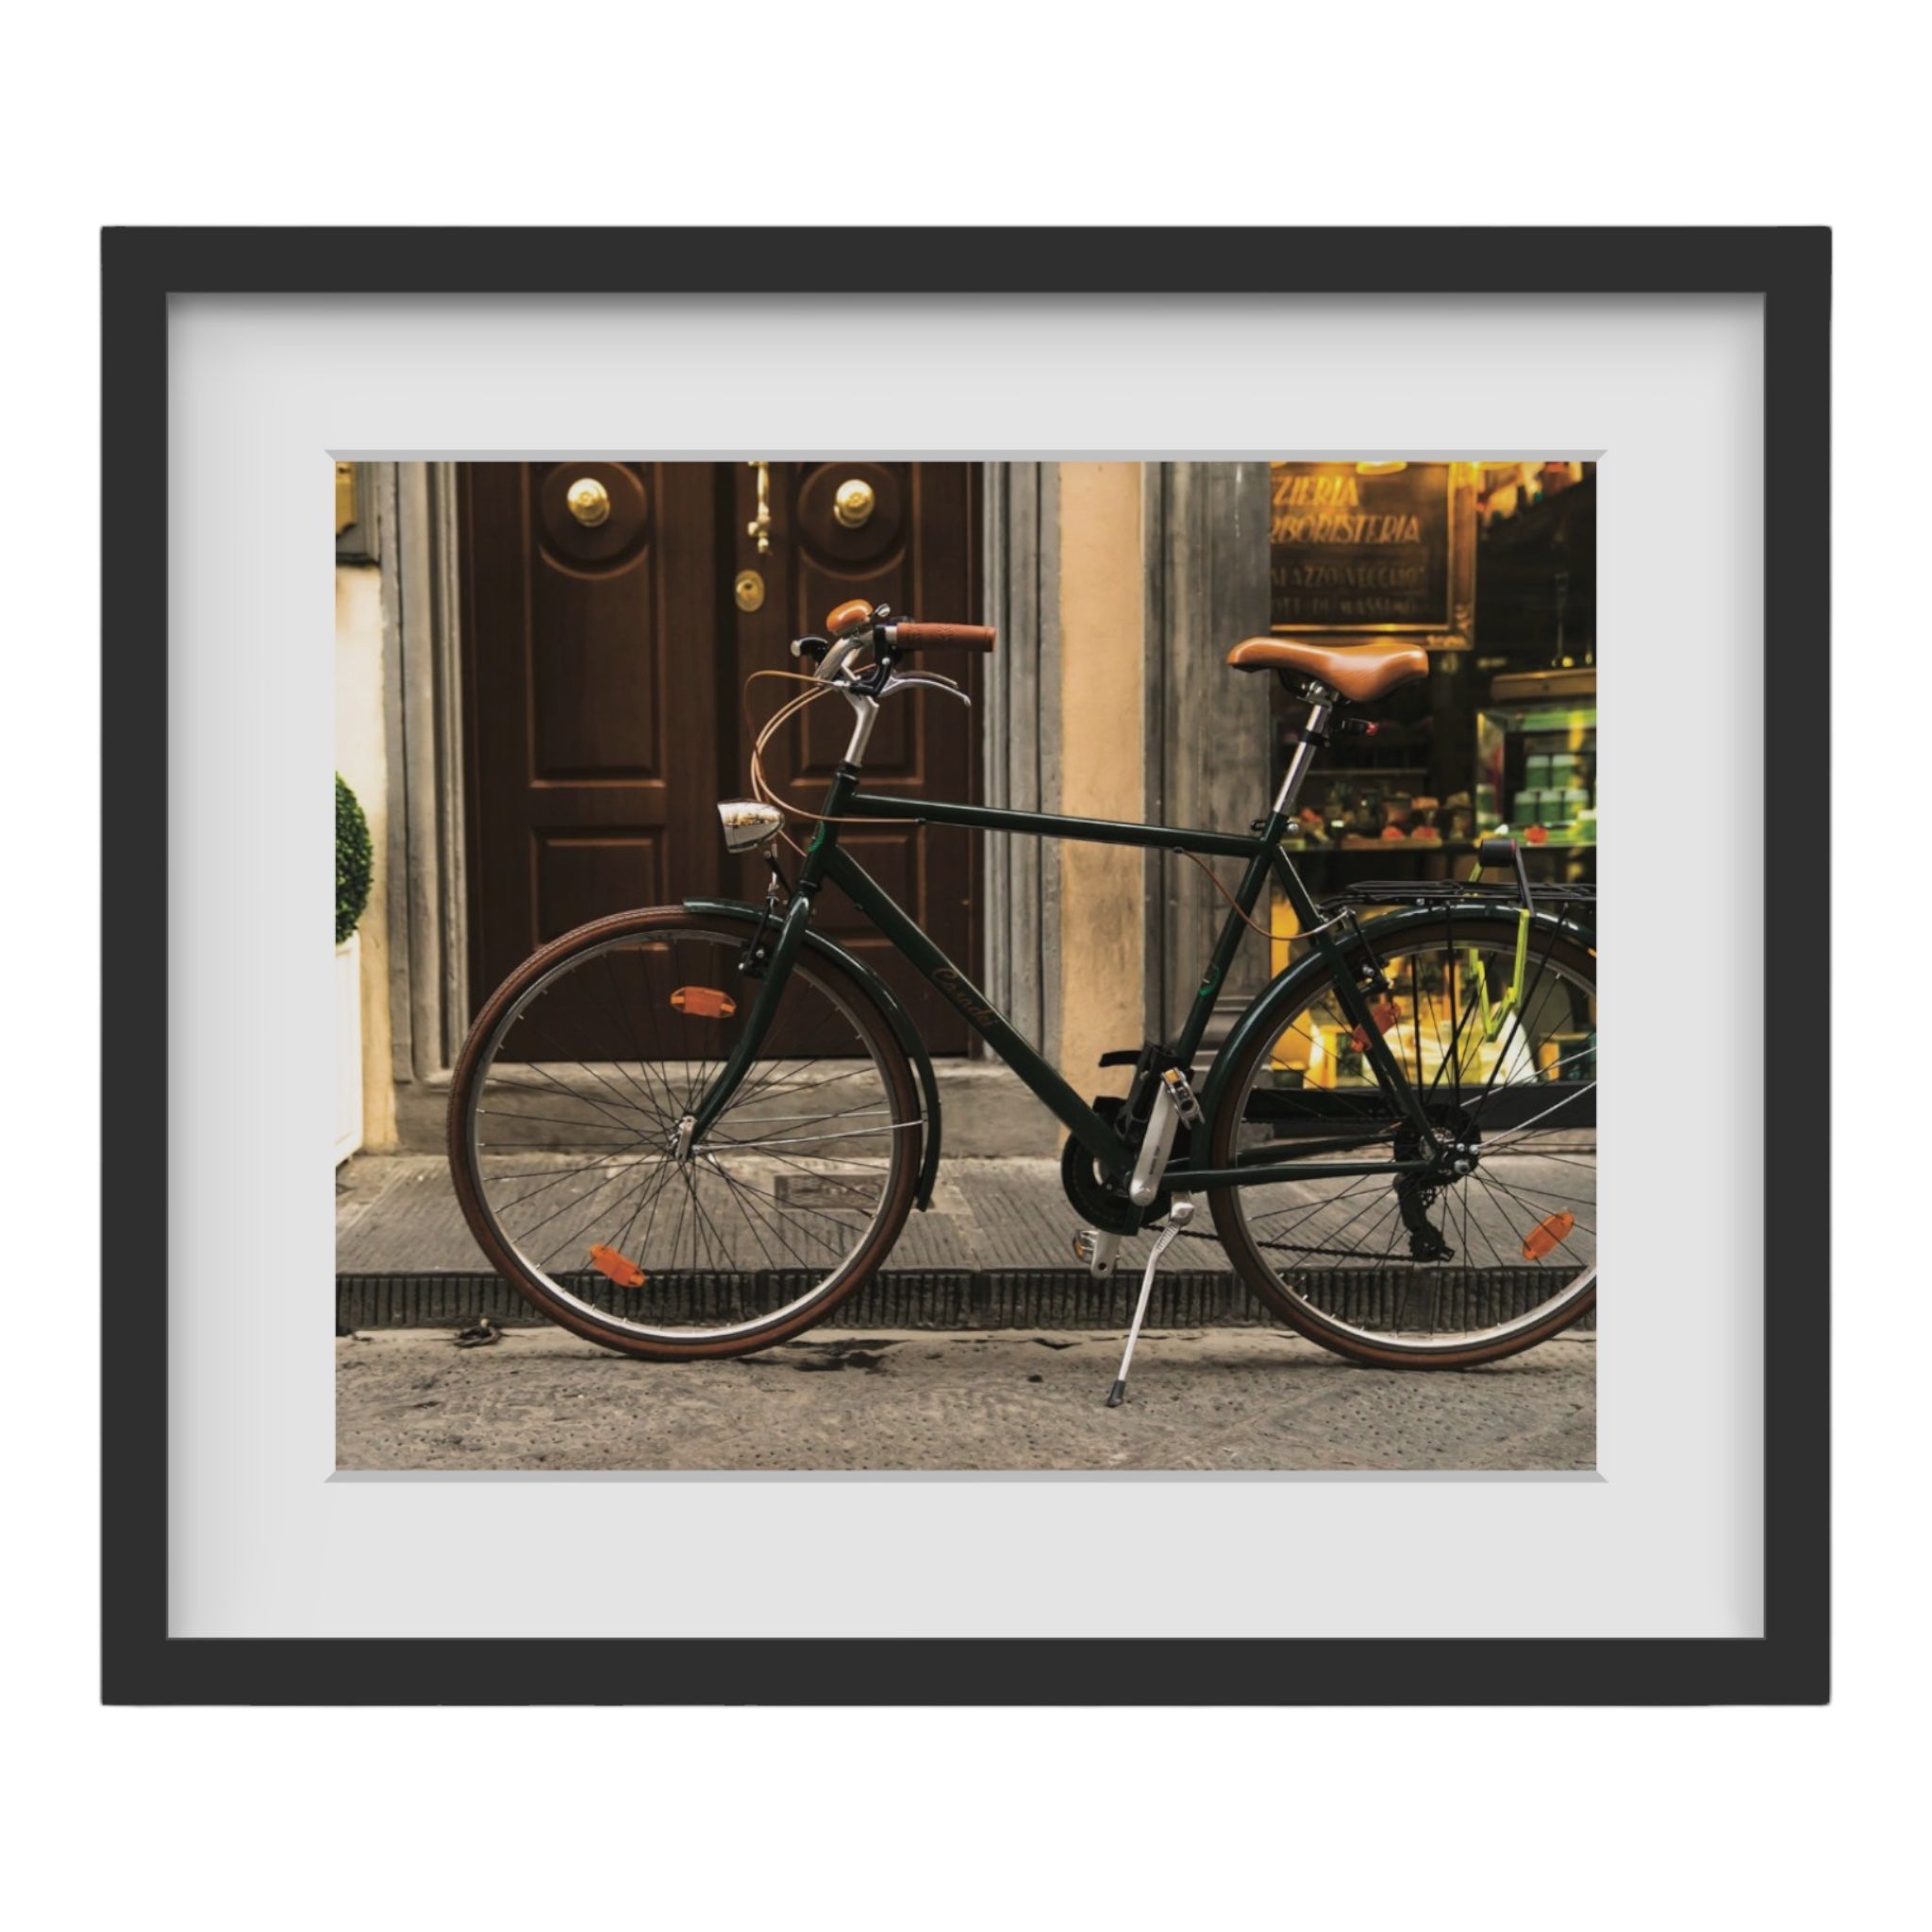 This piece of professional photography for sale is of a charming bicycle parked in Florence, Italy taken by award-winning photographer Paul Scott.  